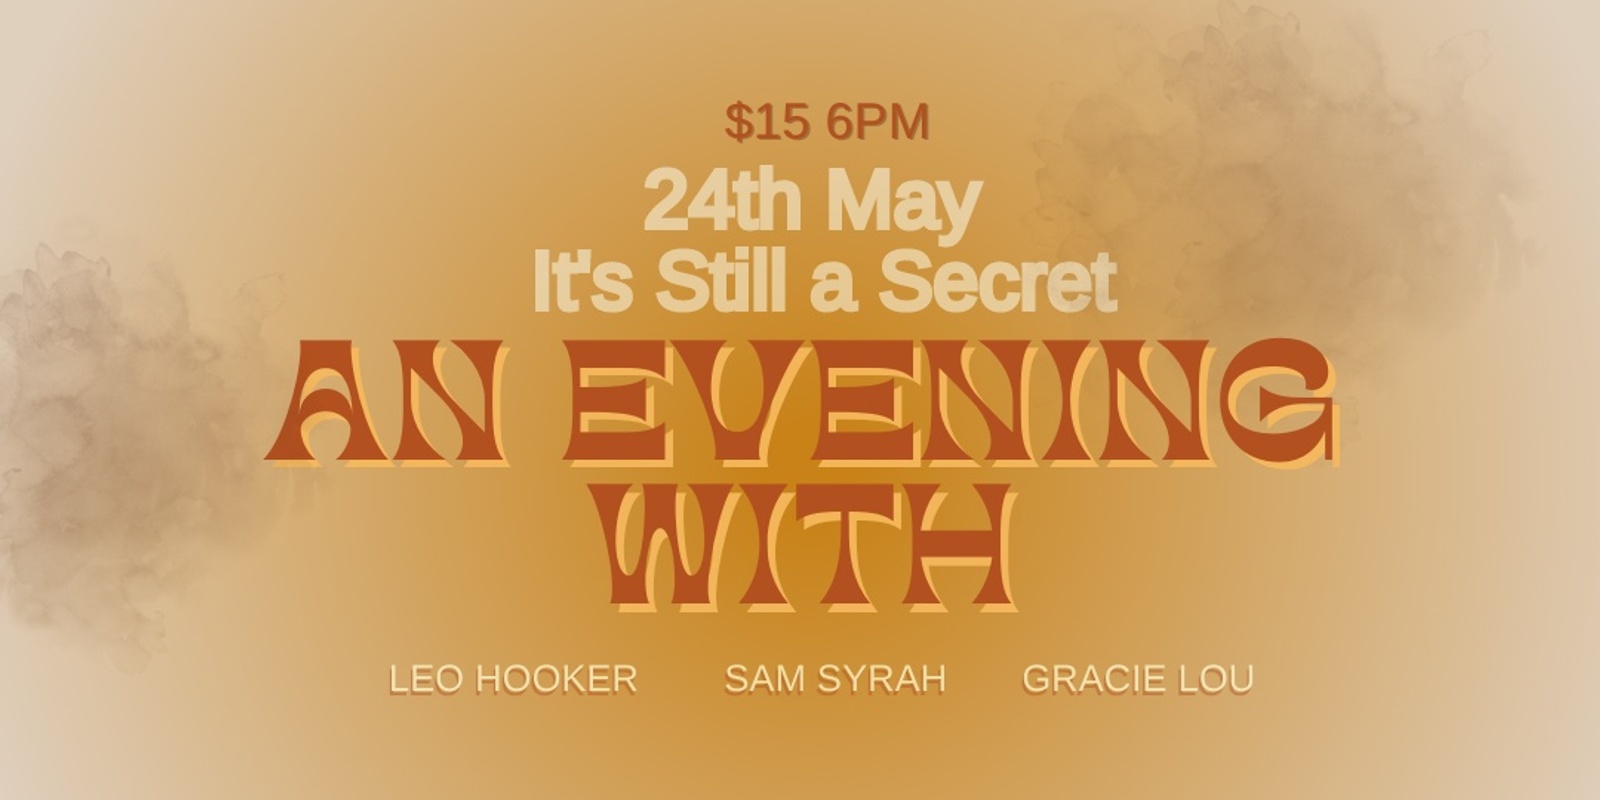 Banner image for An evening with Gracie Lou, Leo Hooker and Sam Syrah 